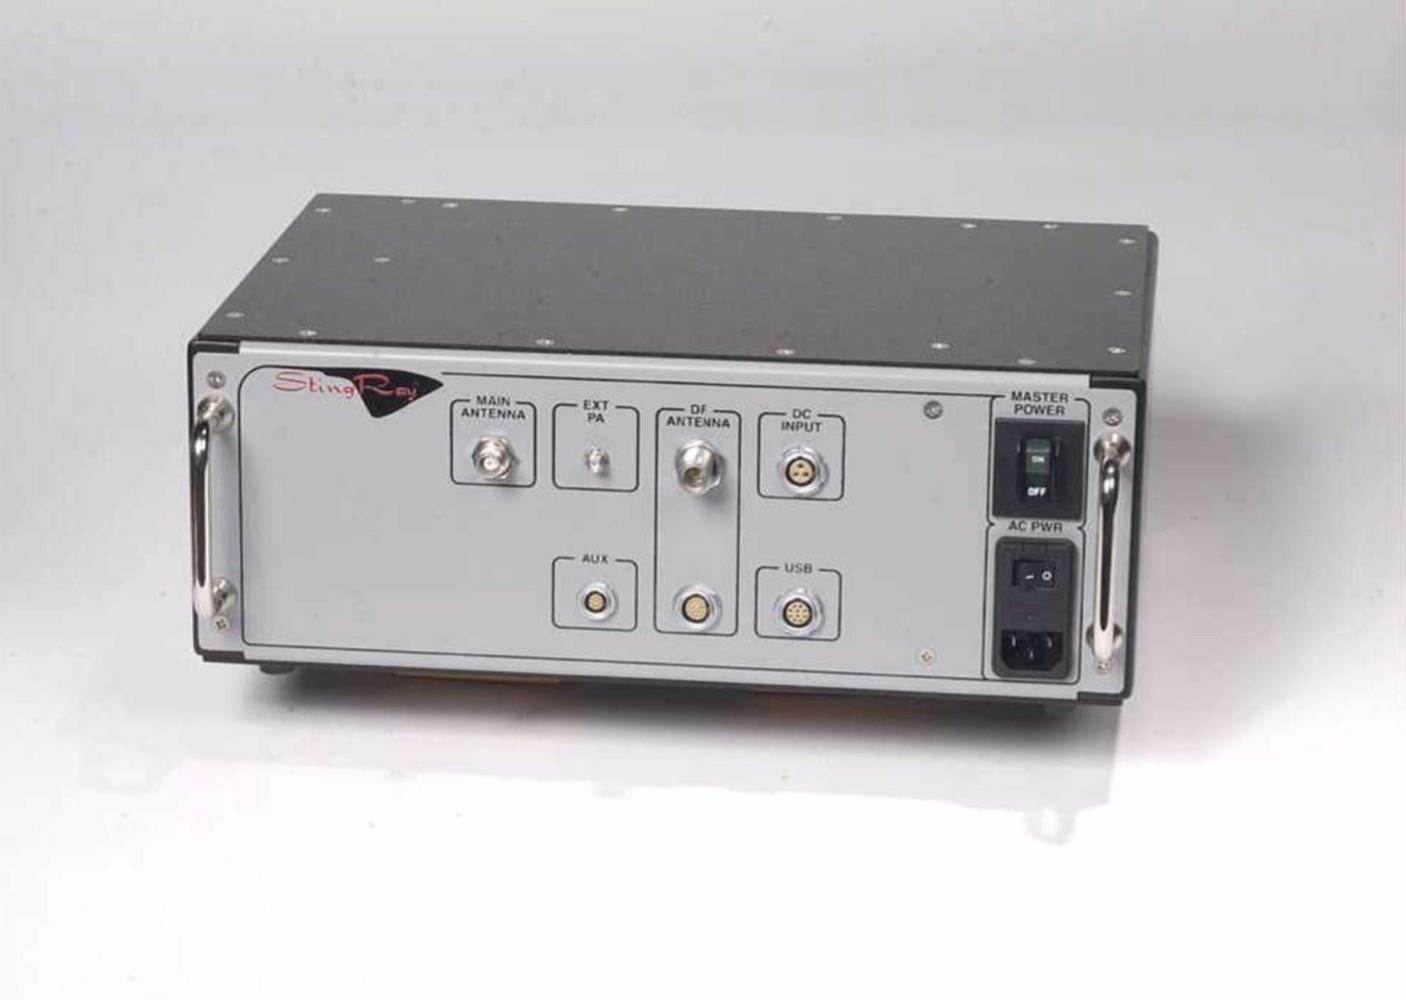 A Stingray device in 2013, in Harris's trademark submission.